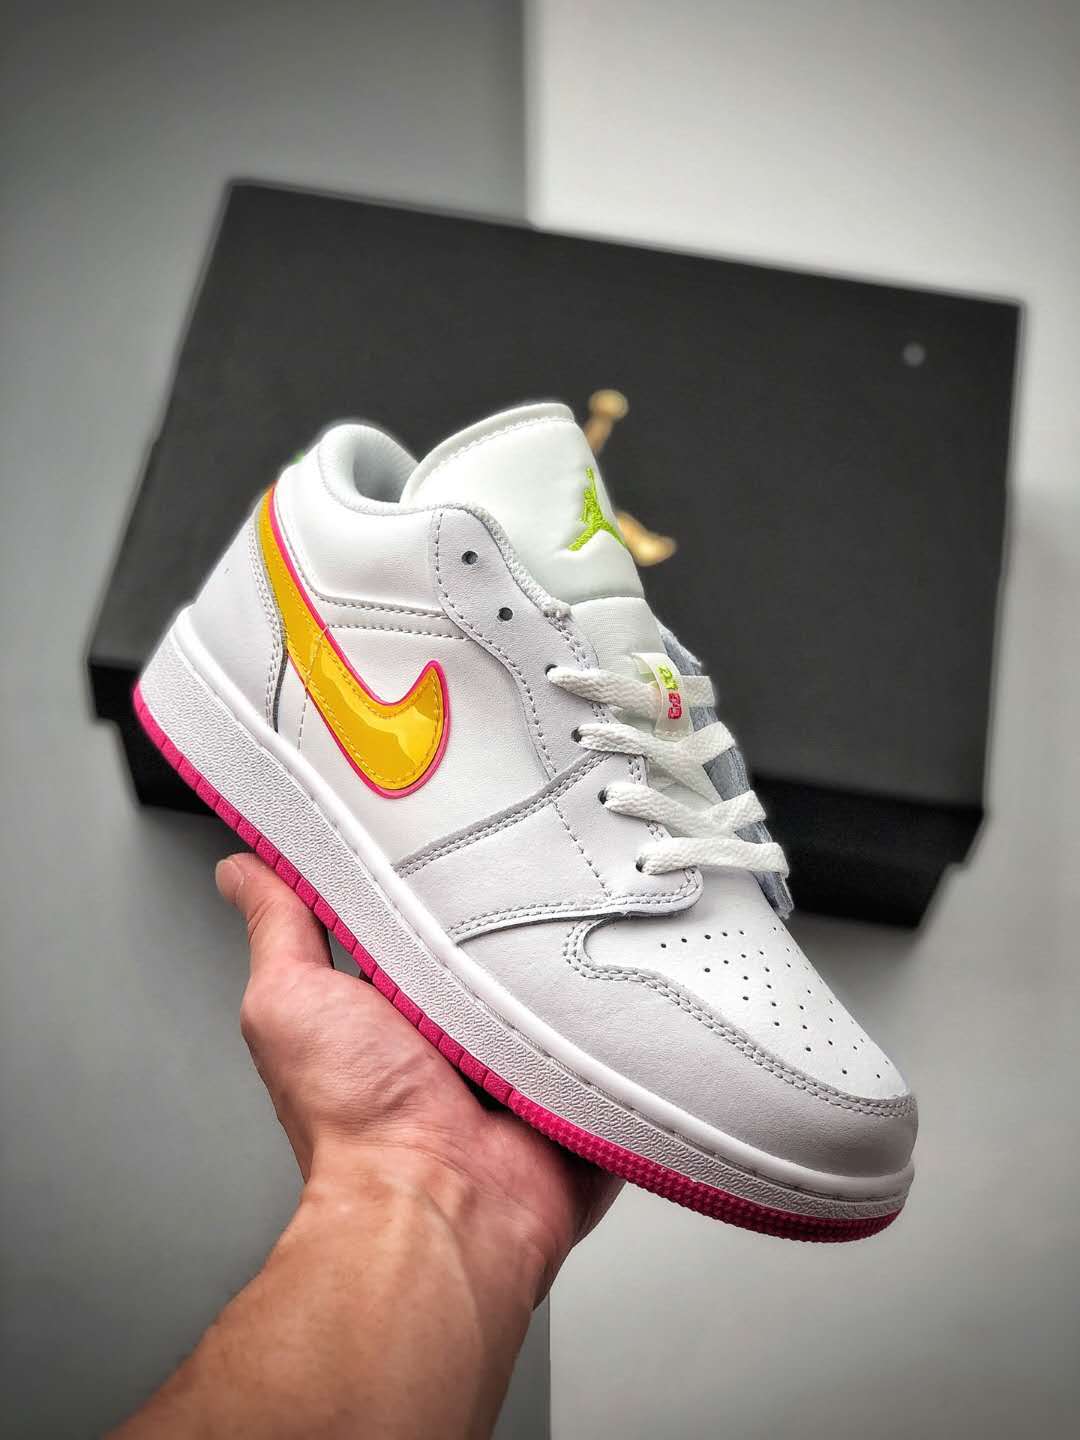 Air Jordan 1 Low GS White Pink Yellow CU4610-100 | Stylish and Vibrant Girls' Sneakers